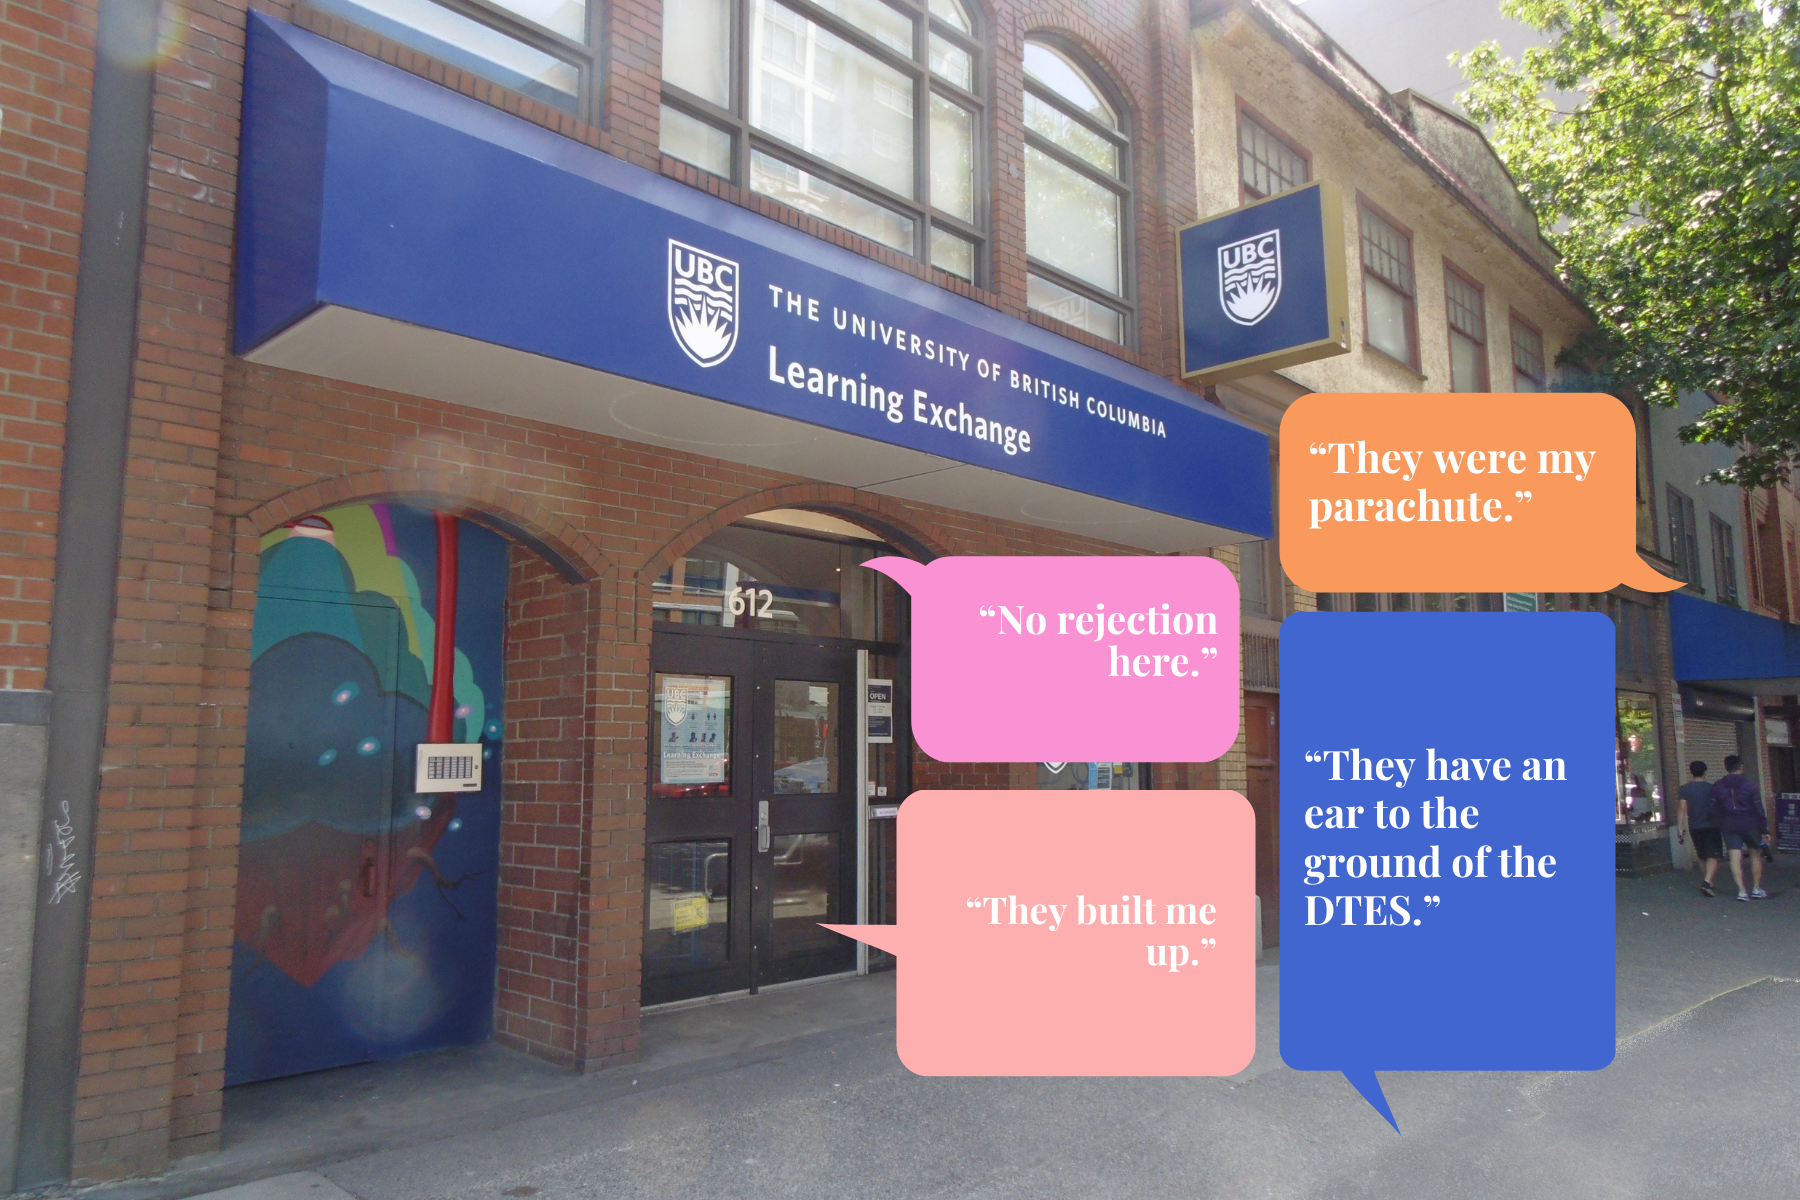 Testimonials overlaying a picture of the Learning Exchange building. Testimonials are from the story, below.